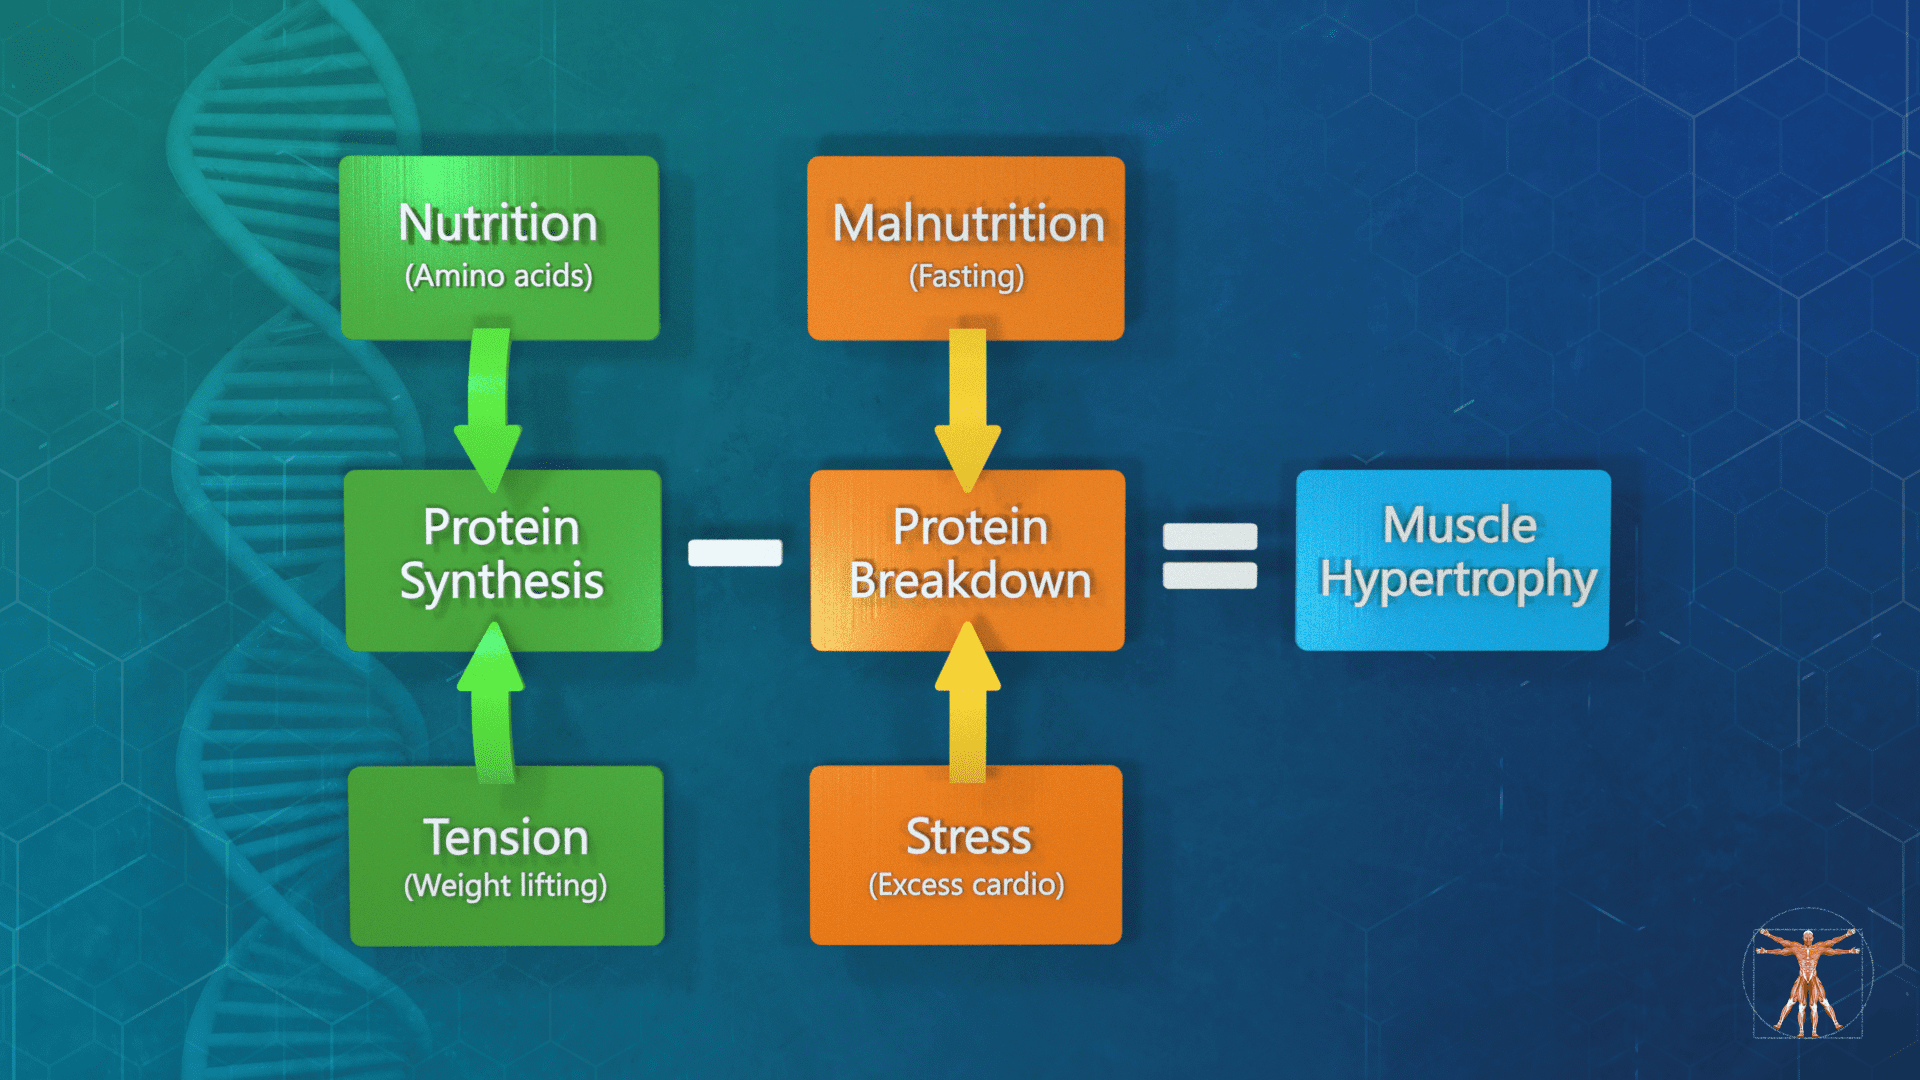 Factors influencing protein synthesis, breakdown, and muscle hypertrophy